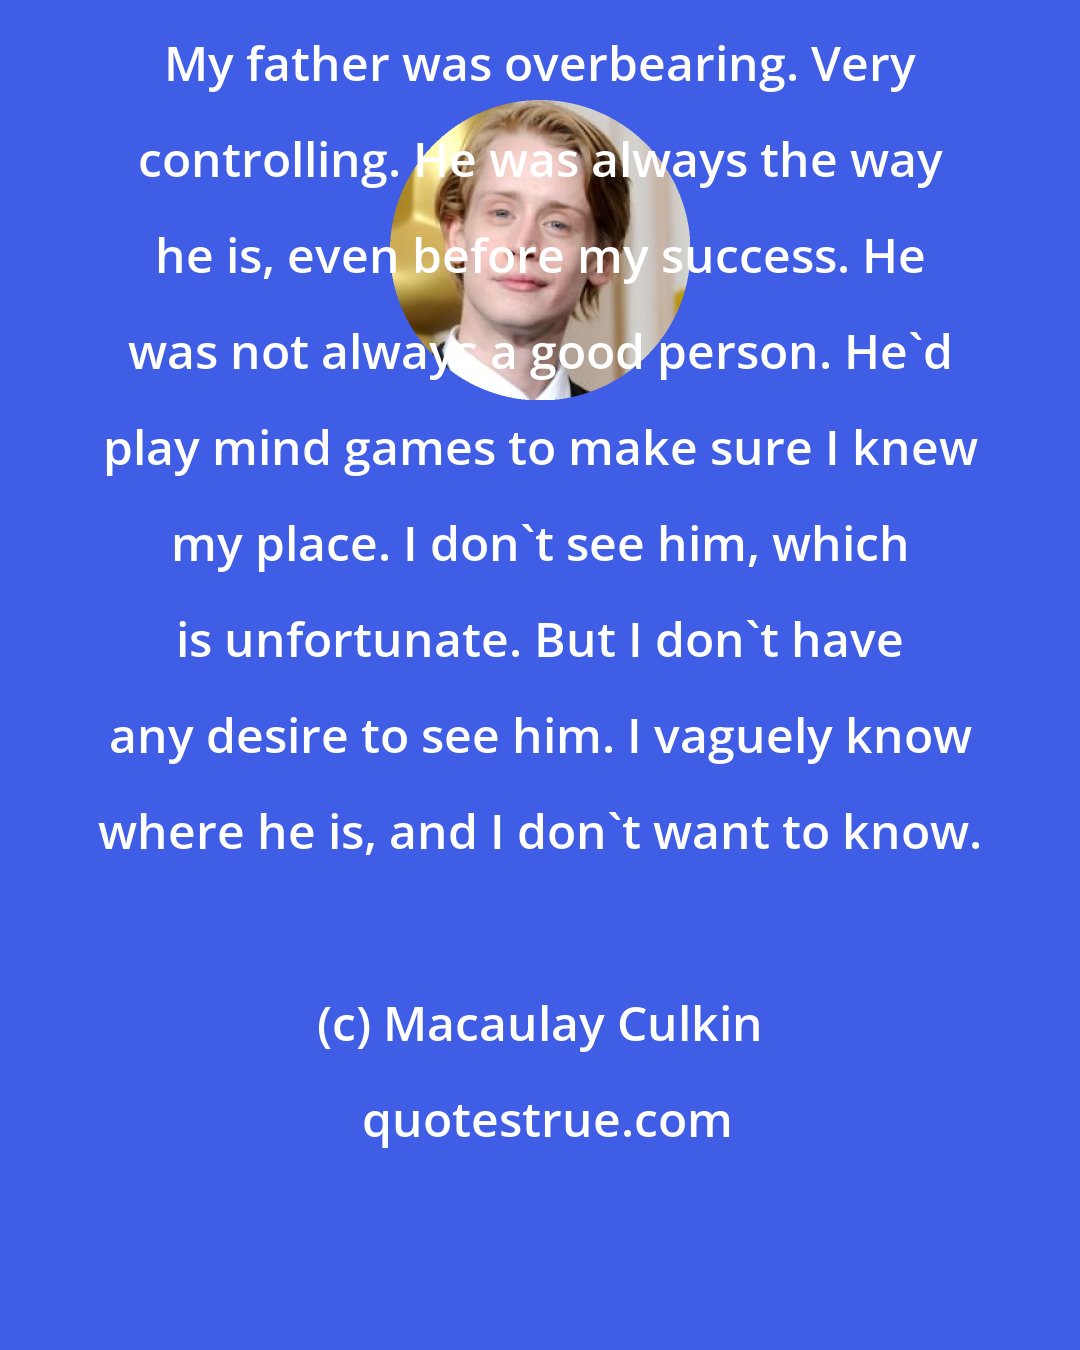 Macaulay Culkin: My father was overbearing. Very controlling. He was always the way he is, even before my success. He was not always a good person. He'd play mind games to make sure I knew my place. I don't see him, which is unfortunate. But I don't have any desire to see him. I vaguely know where he is, and I don't want to know.